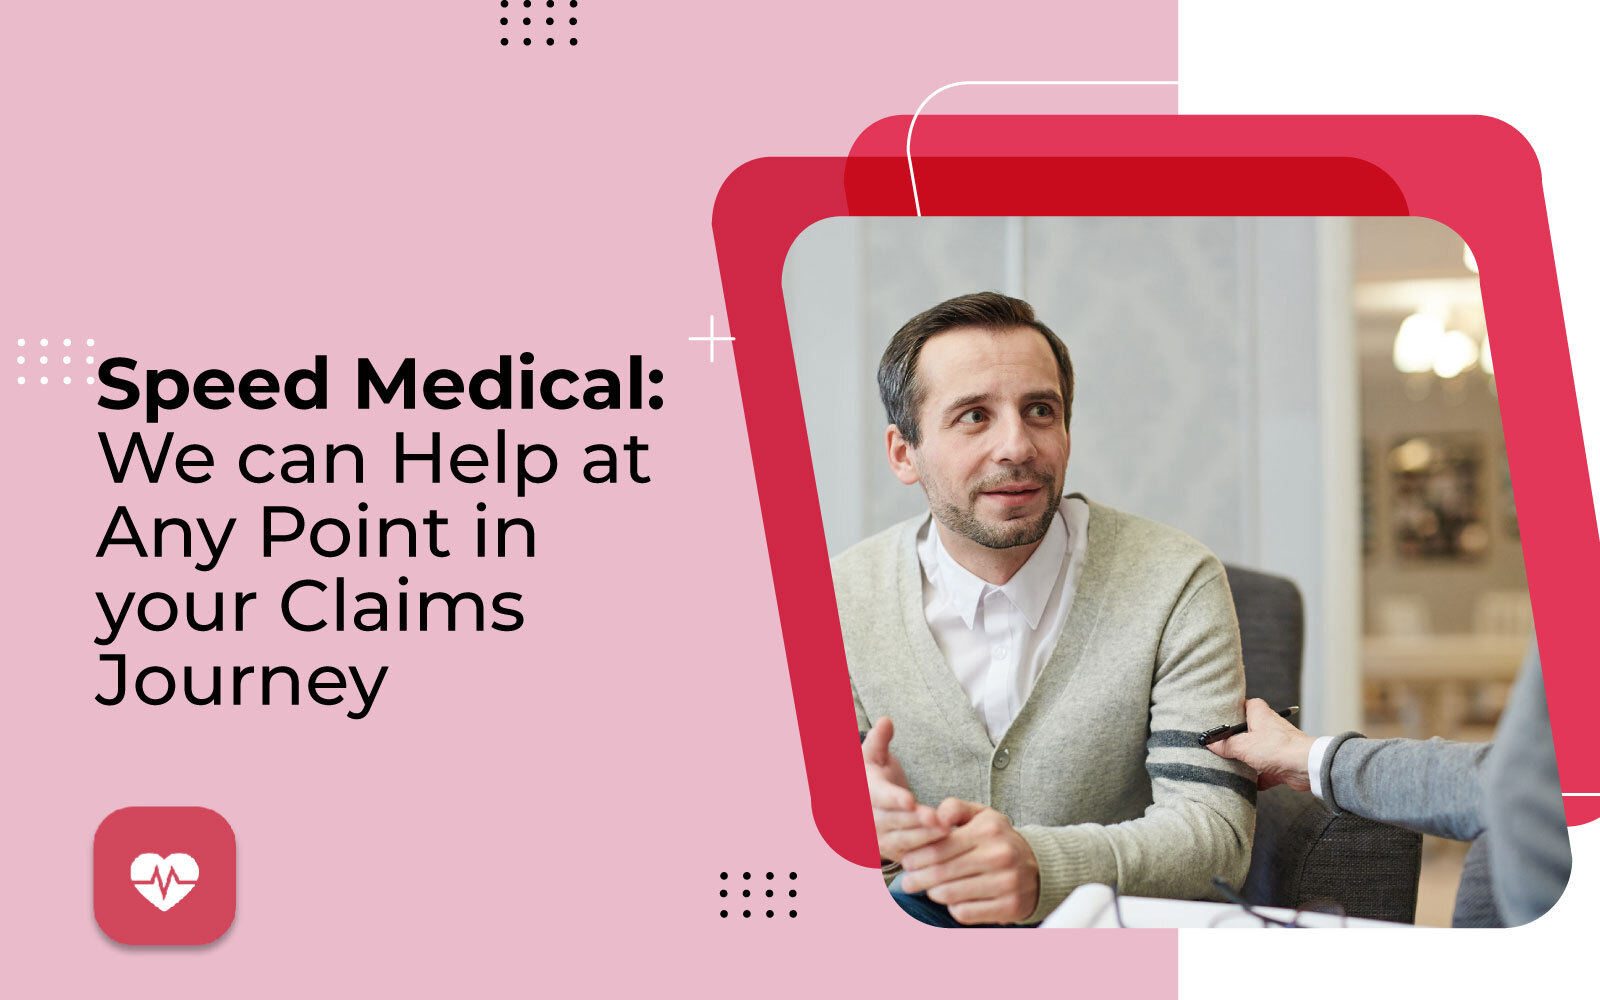 Speed Medical: We can Help at Any Point in your Claims Journey